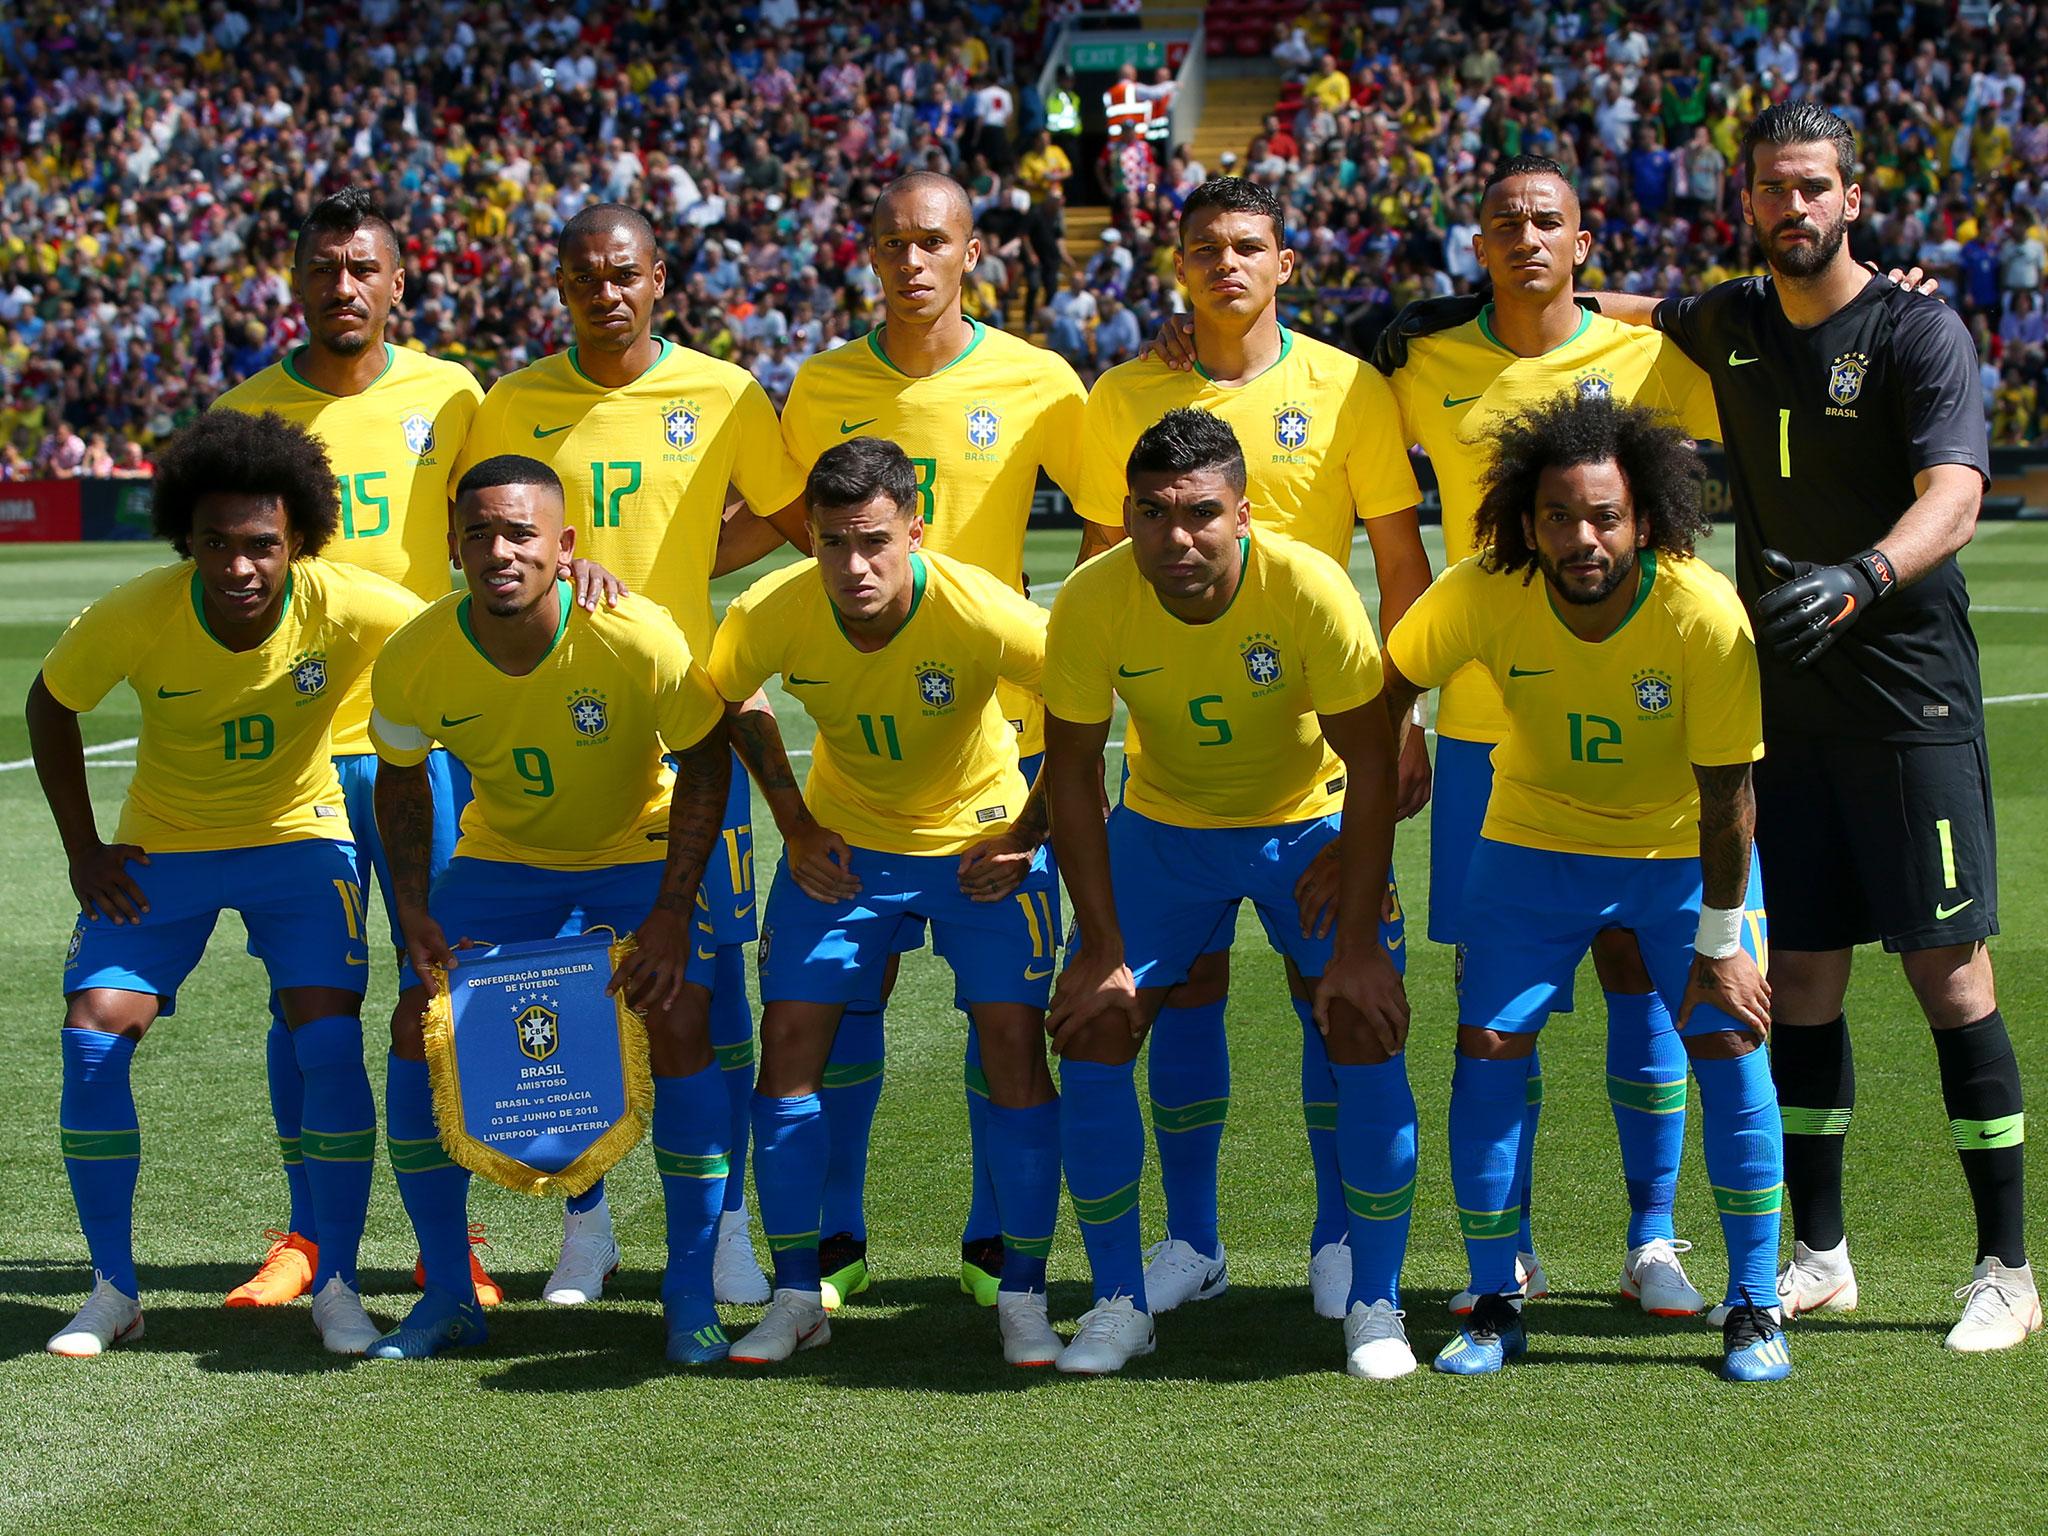 Brazil World Cup Squad Guide Full Fixtures Group Ones To Watch Odds And More The Independent